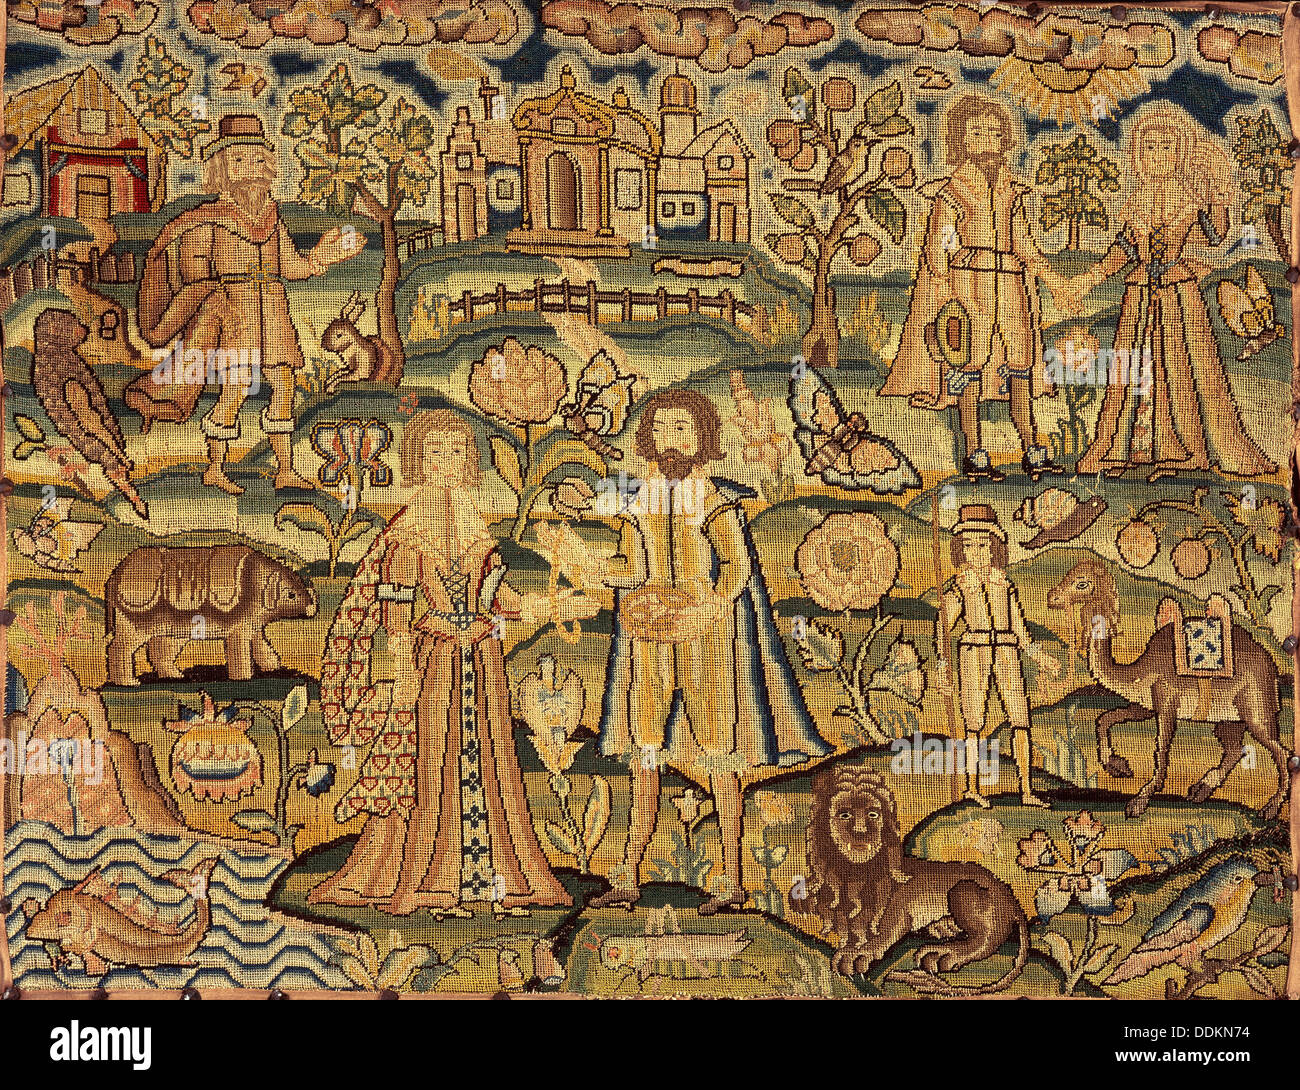 Embroidery panel showing people, flowers, insects, fish and animals, 17th century. Artist: Unknown Stock Photo